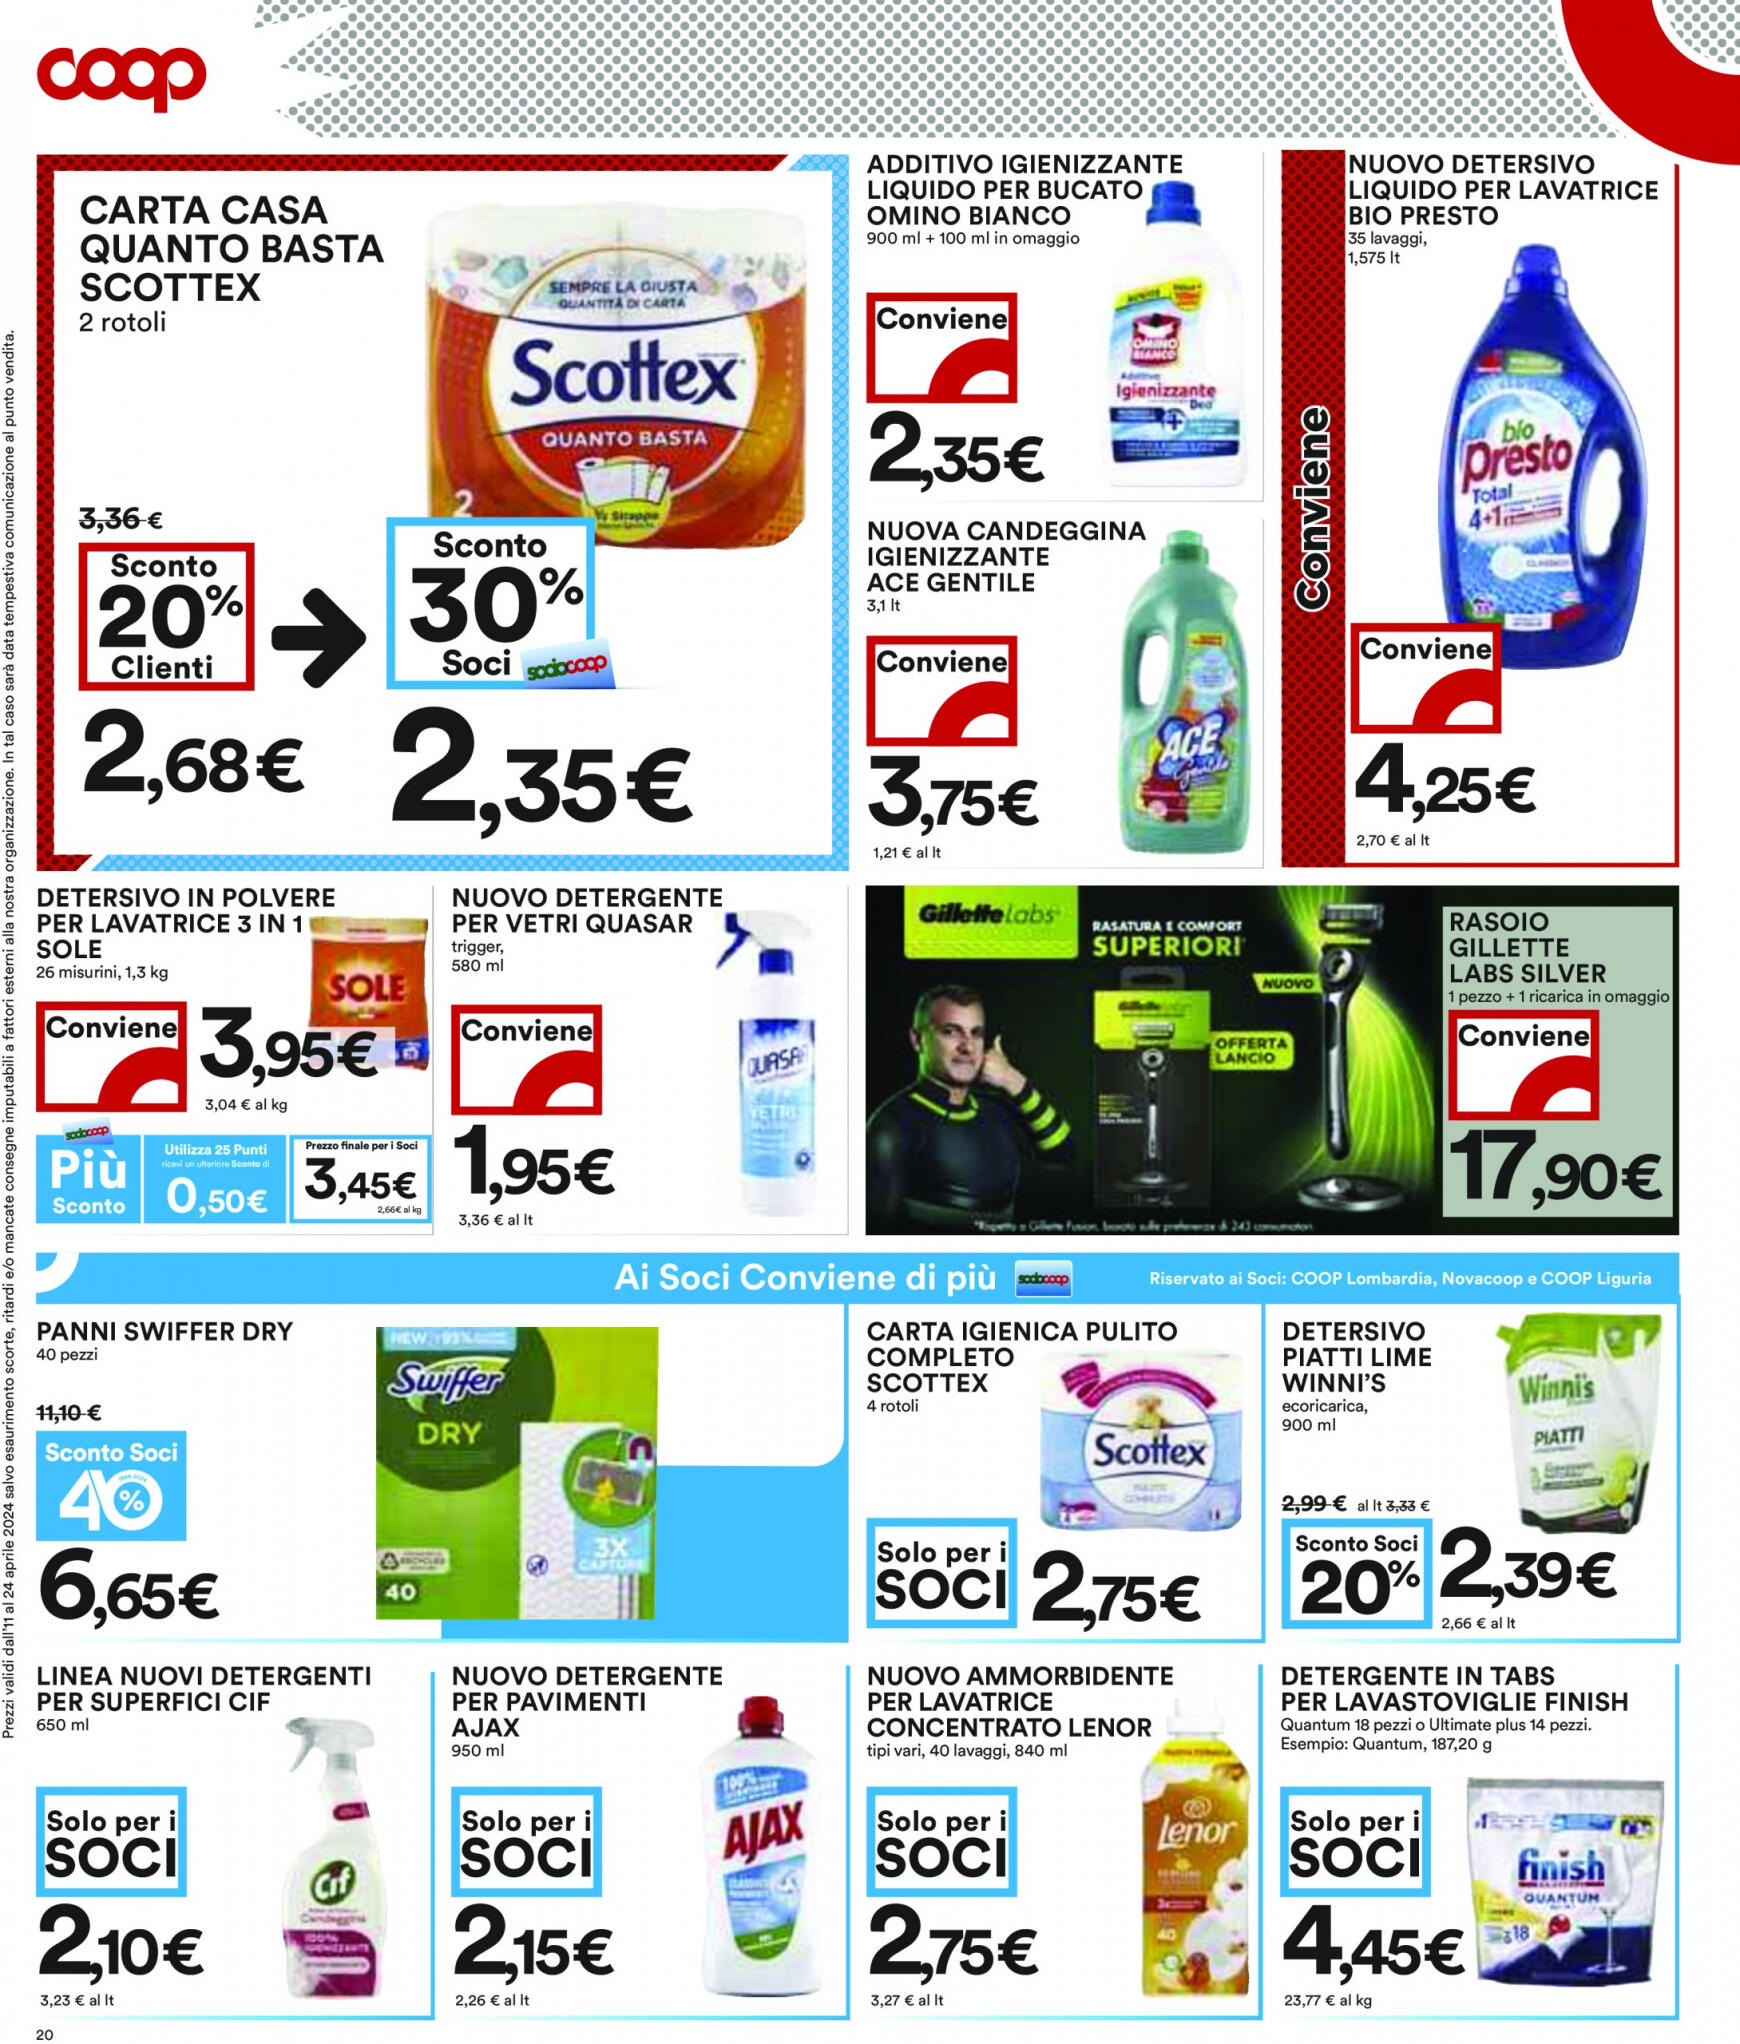 coop - Nuovo volantino Coop 11.04. - 24.04. - page: 20